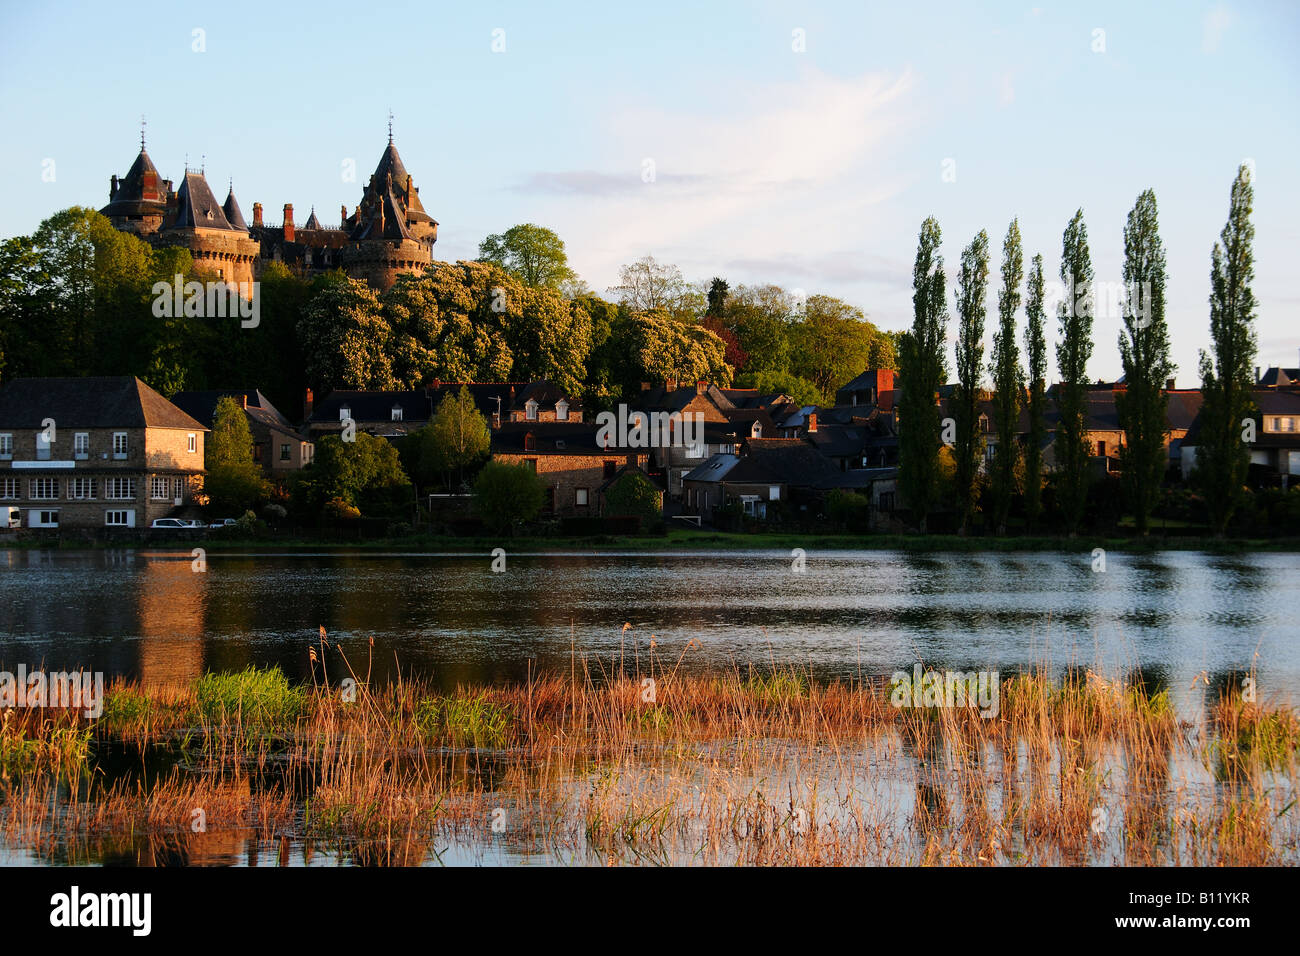 The Lake and Chateau de Combourg in Northern Brittany France Stock Photo